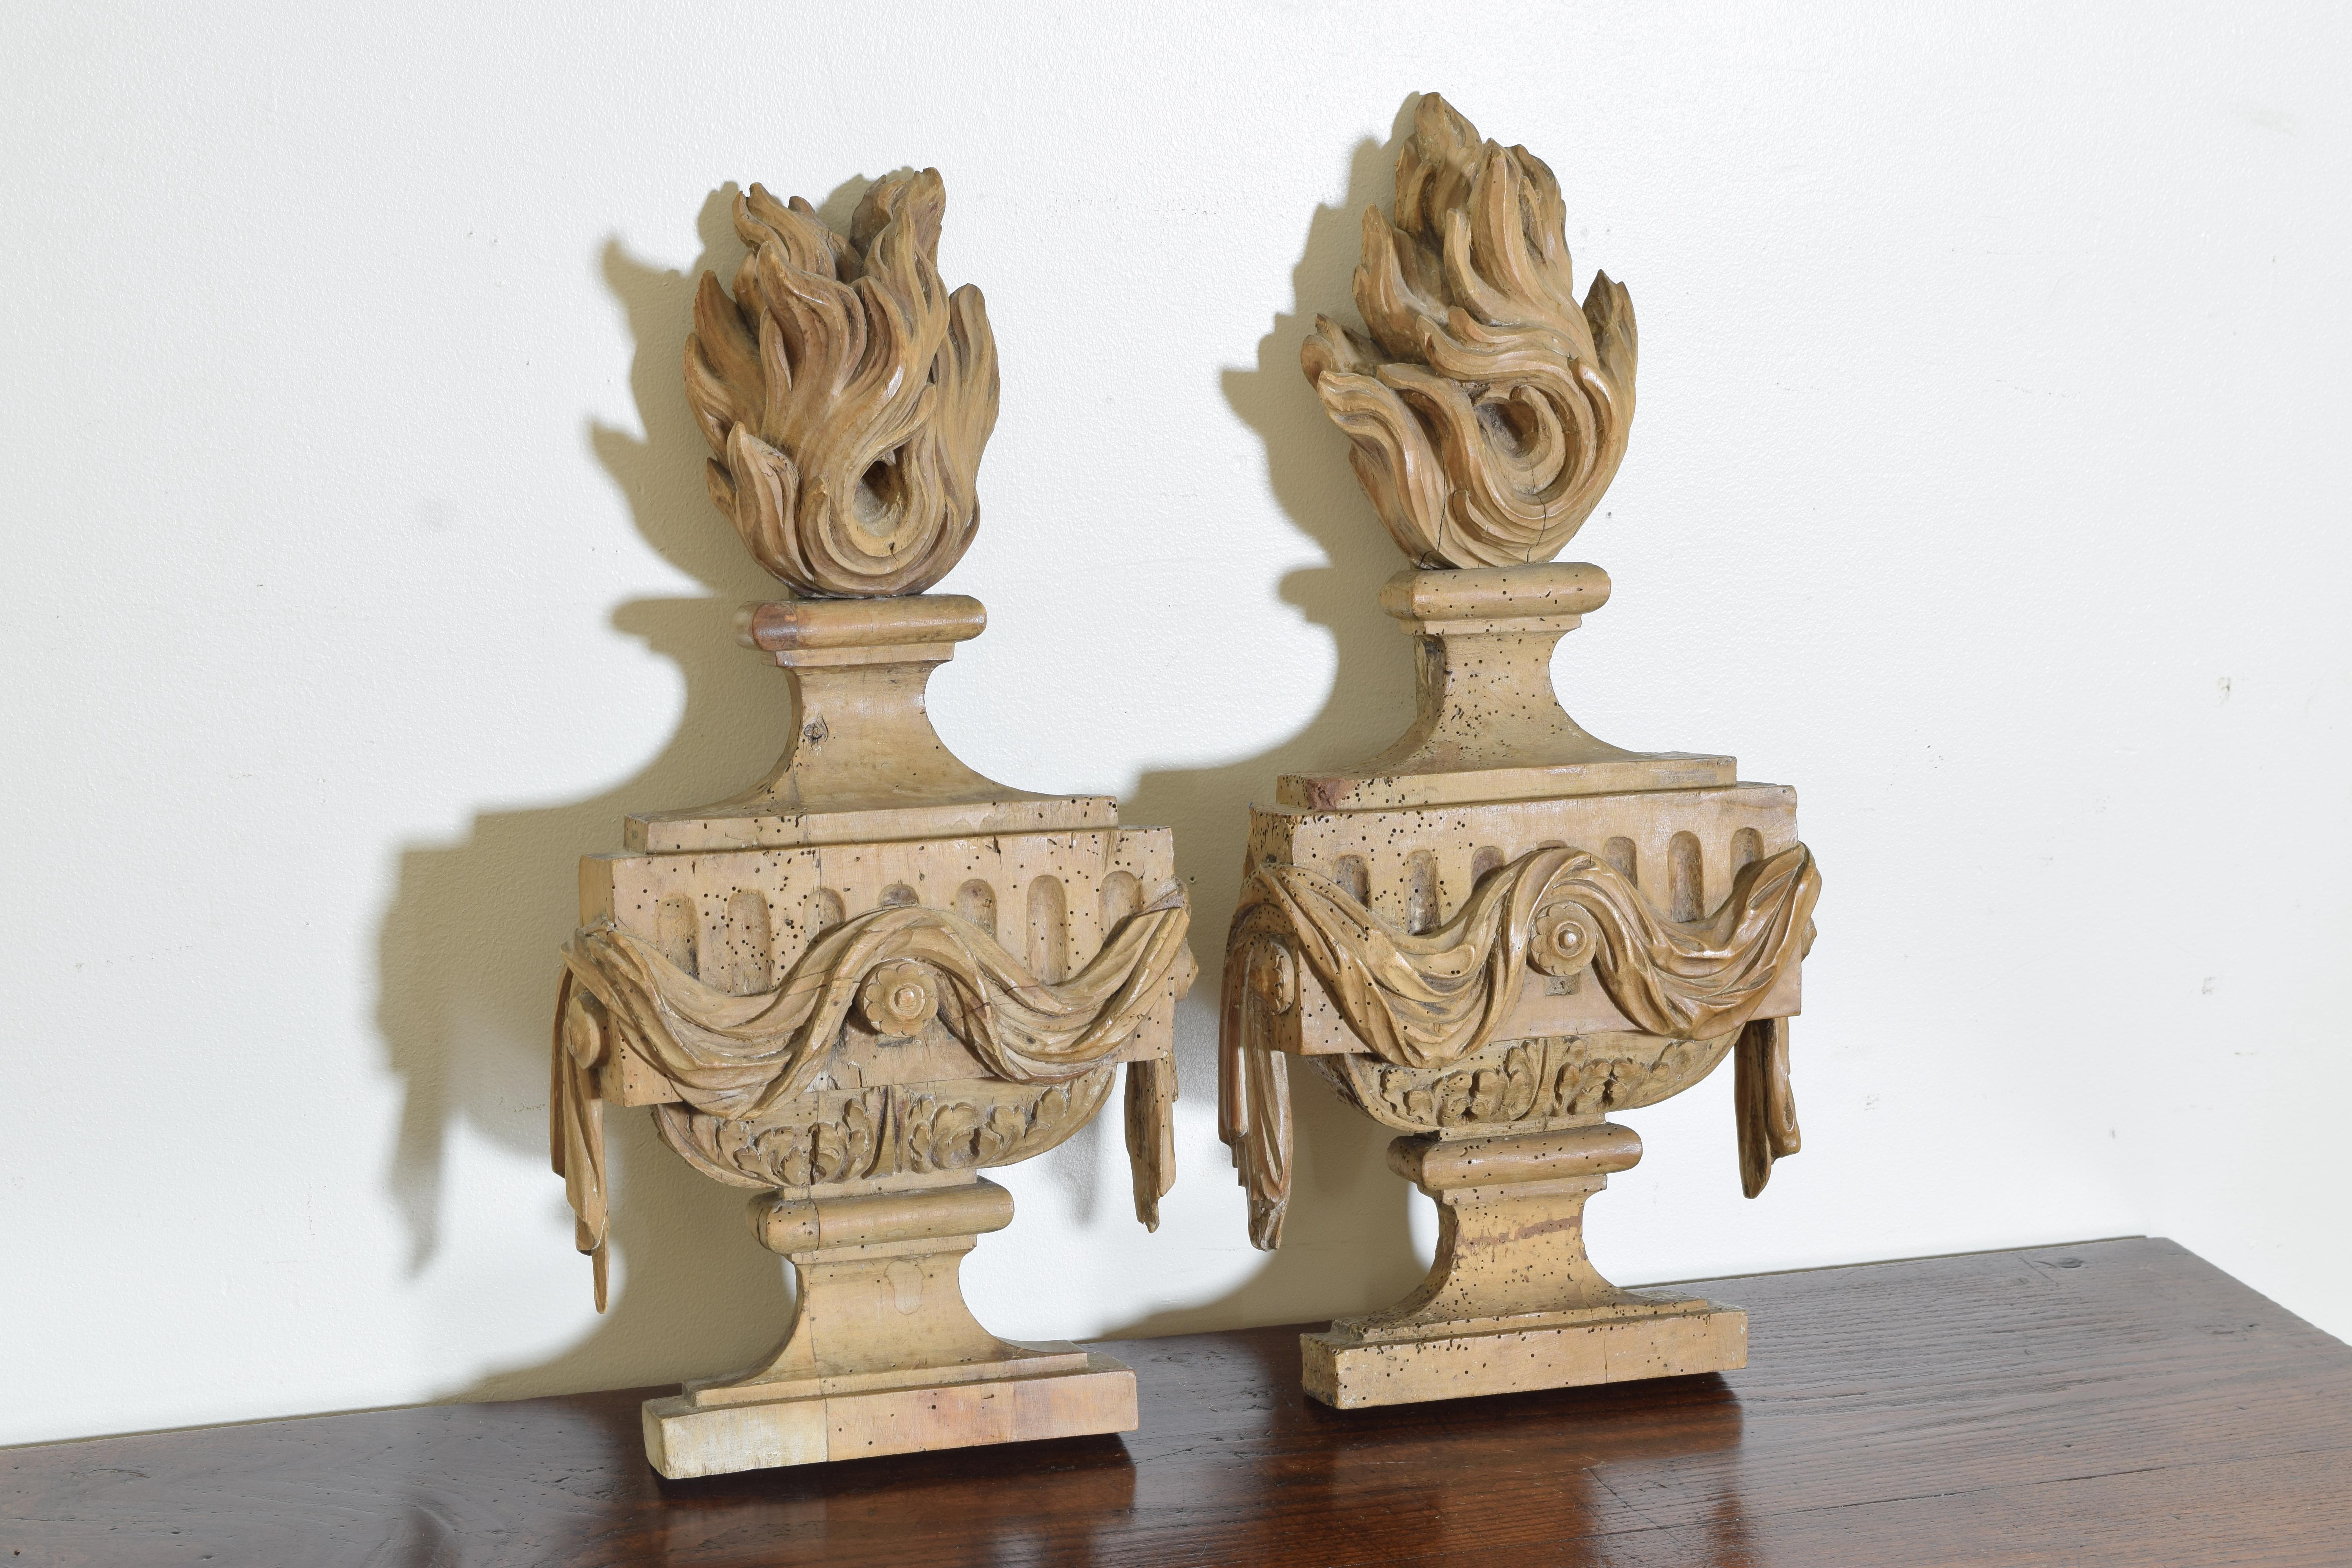 European Pair of Continental Neoclassical Carved Wooden Capitals, late 18th century